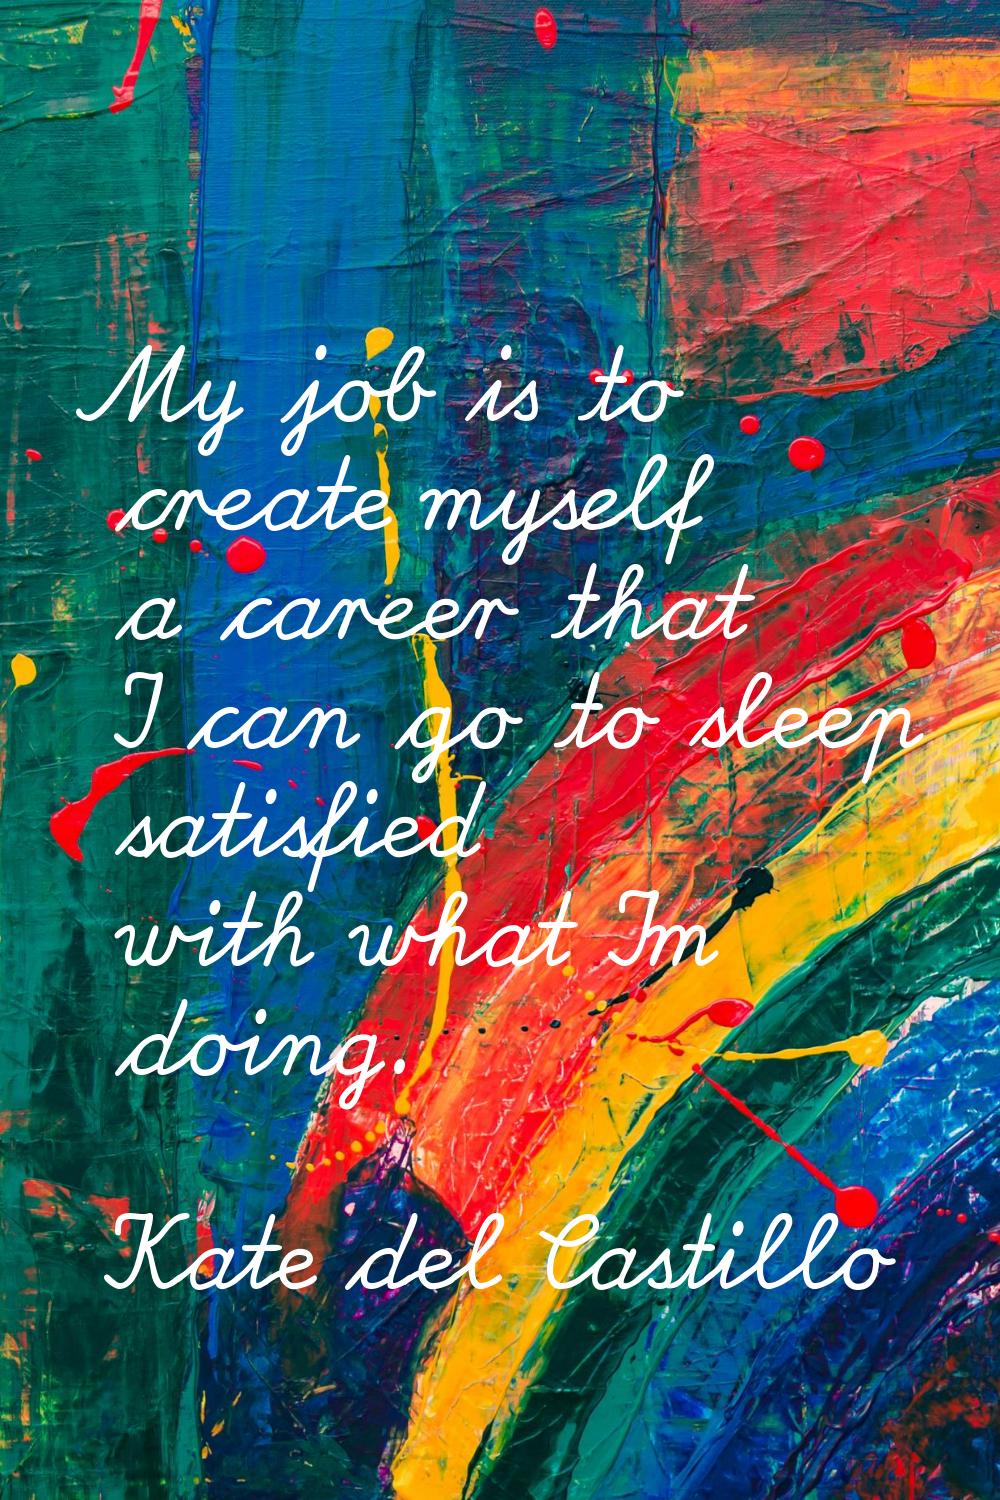 My job is to create myself a career that I can go to sleep satisfied with what I'm doing.